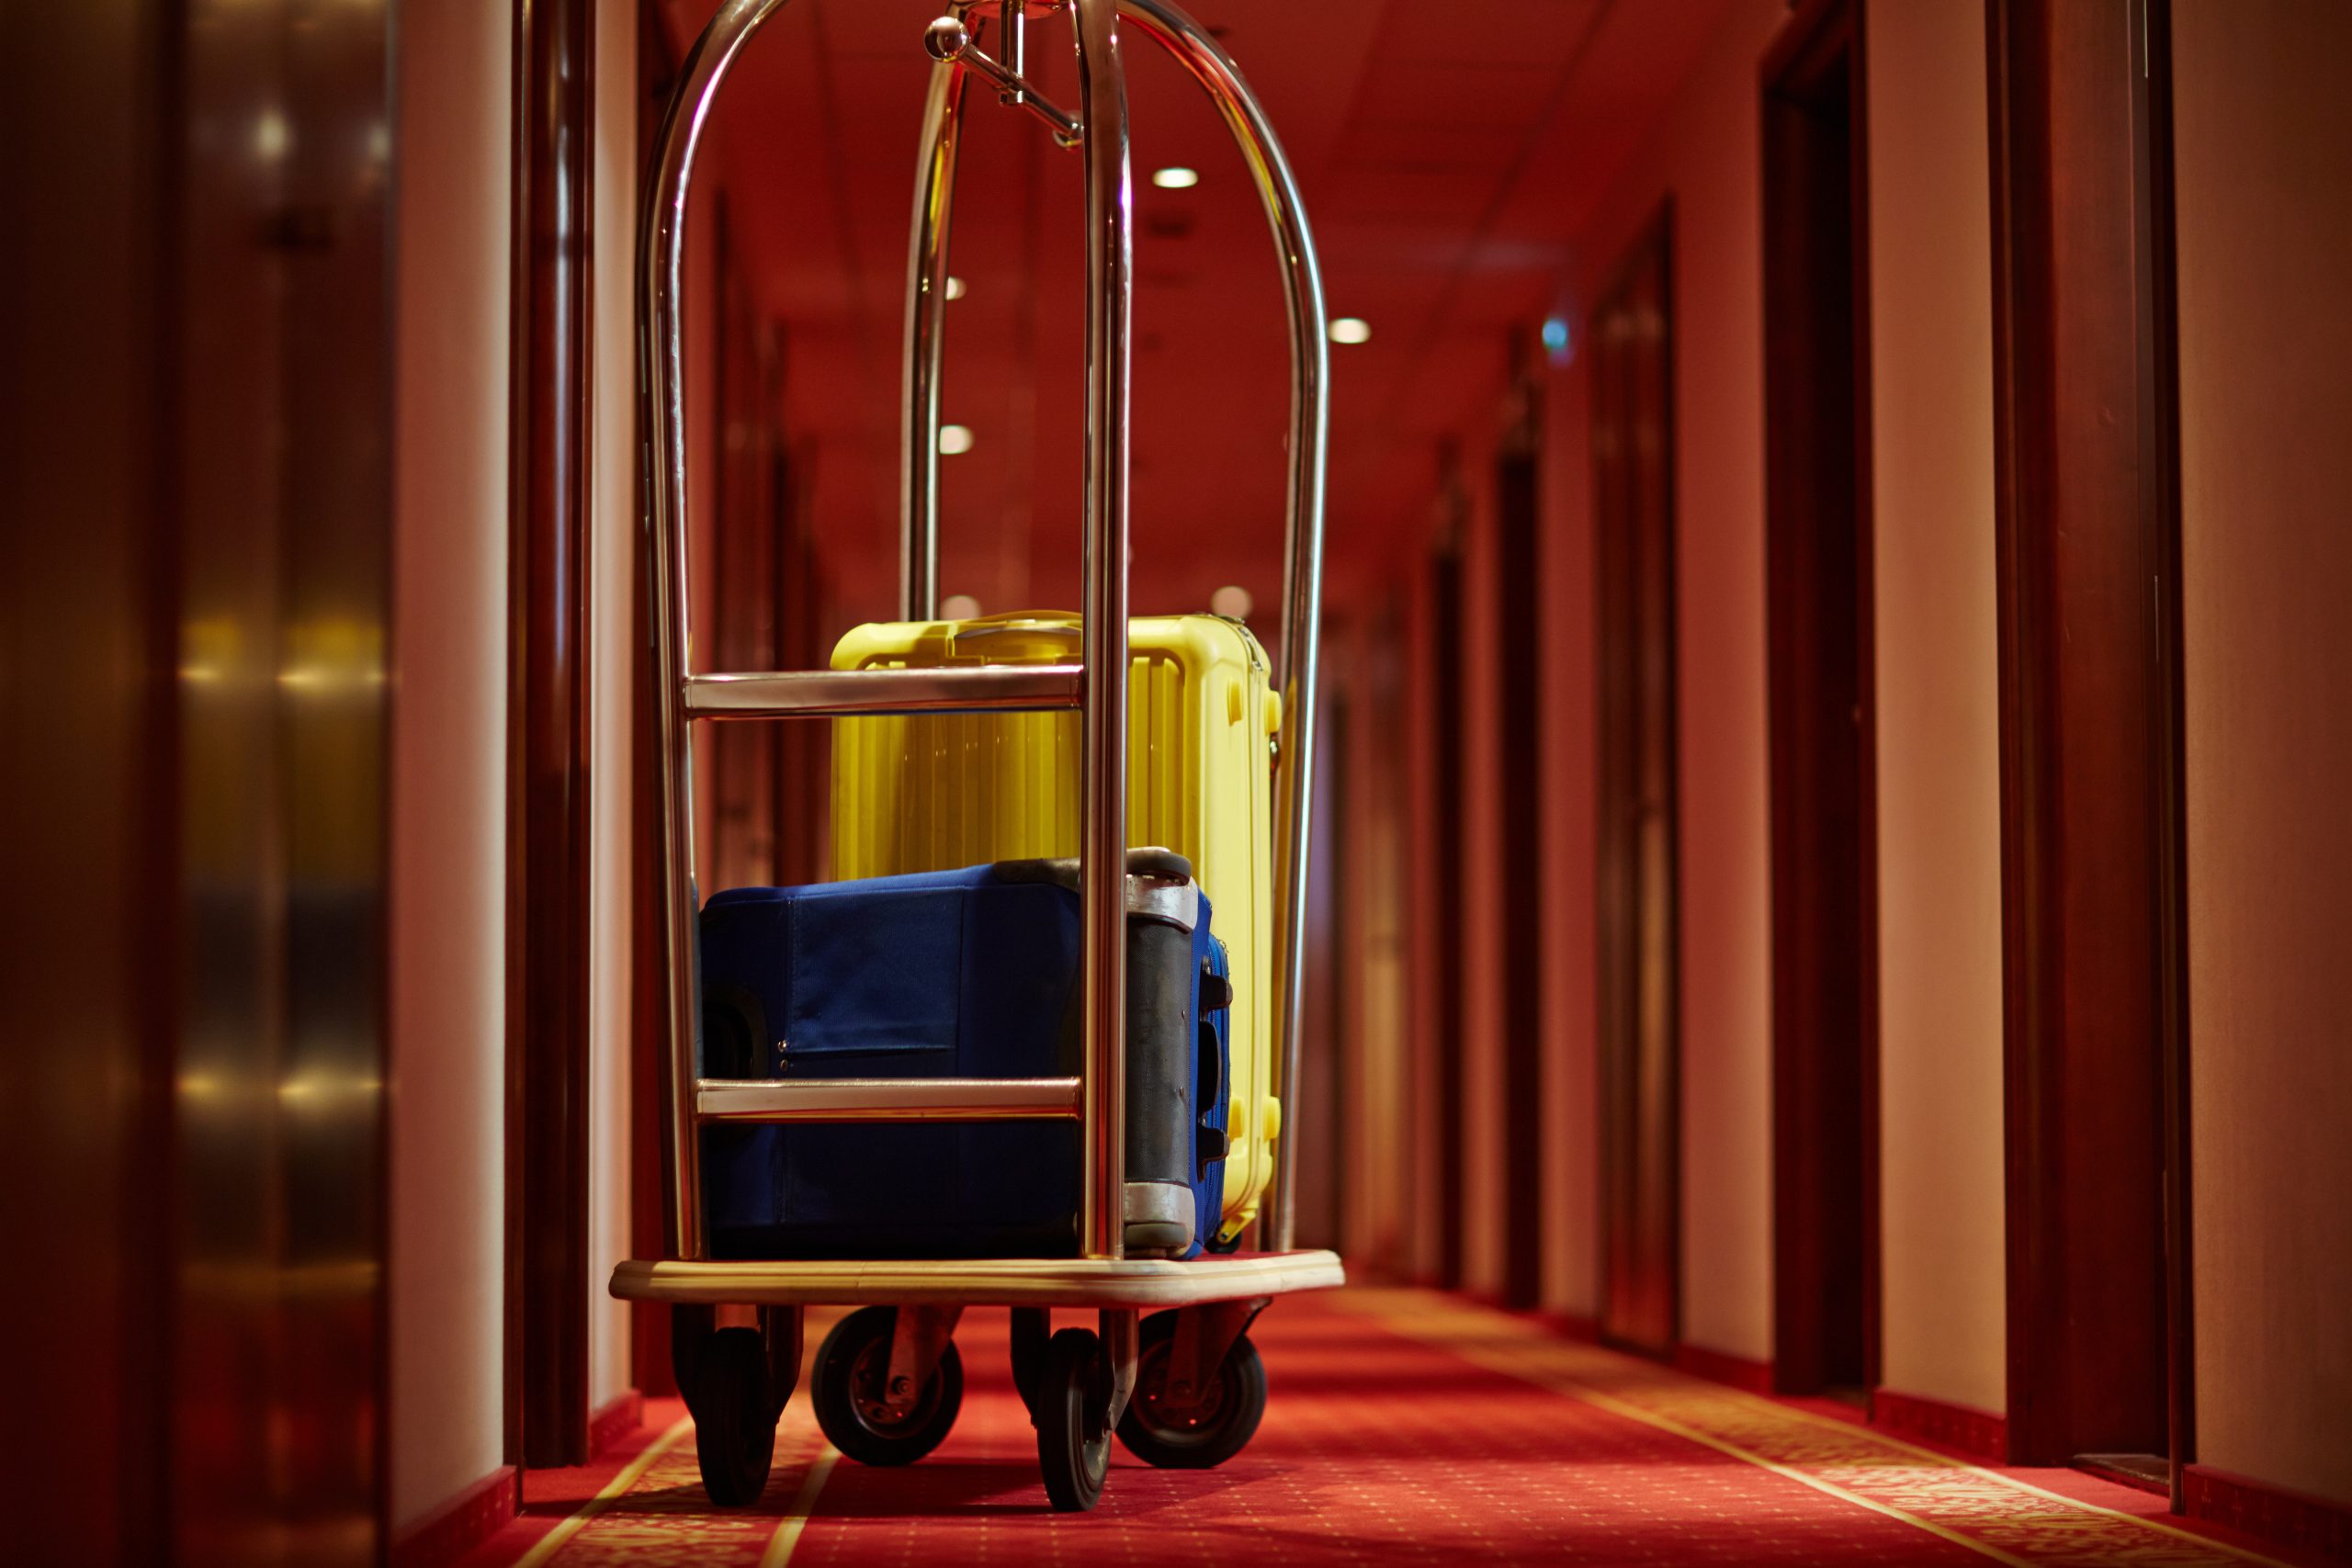 Luggage With Suitcases in Middle of Red Carpeted Hospitality Hotel